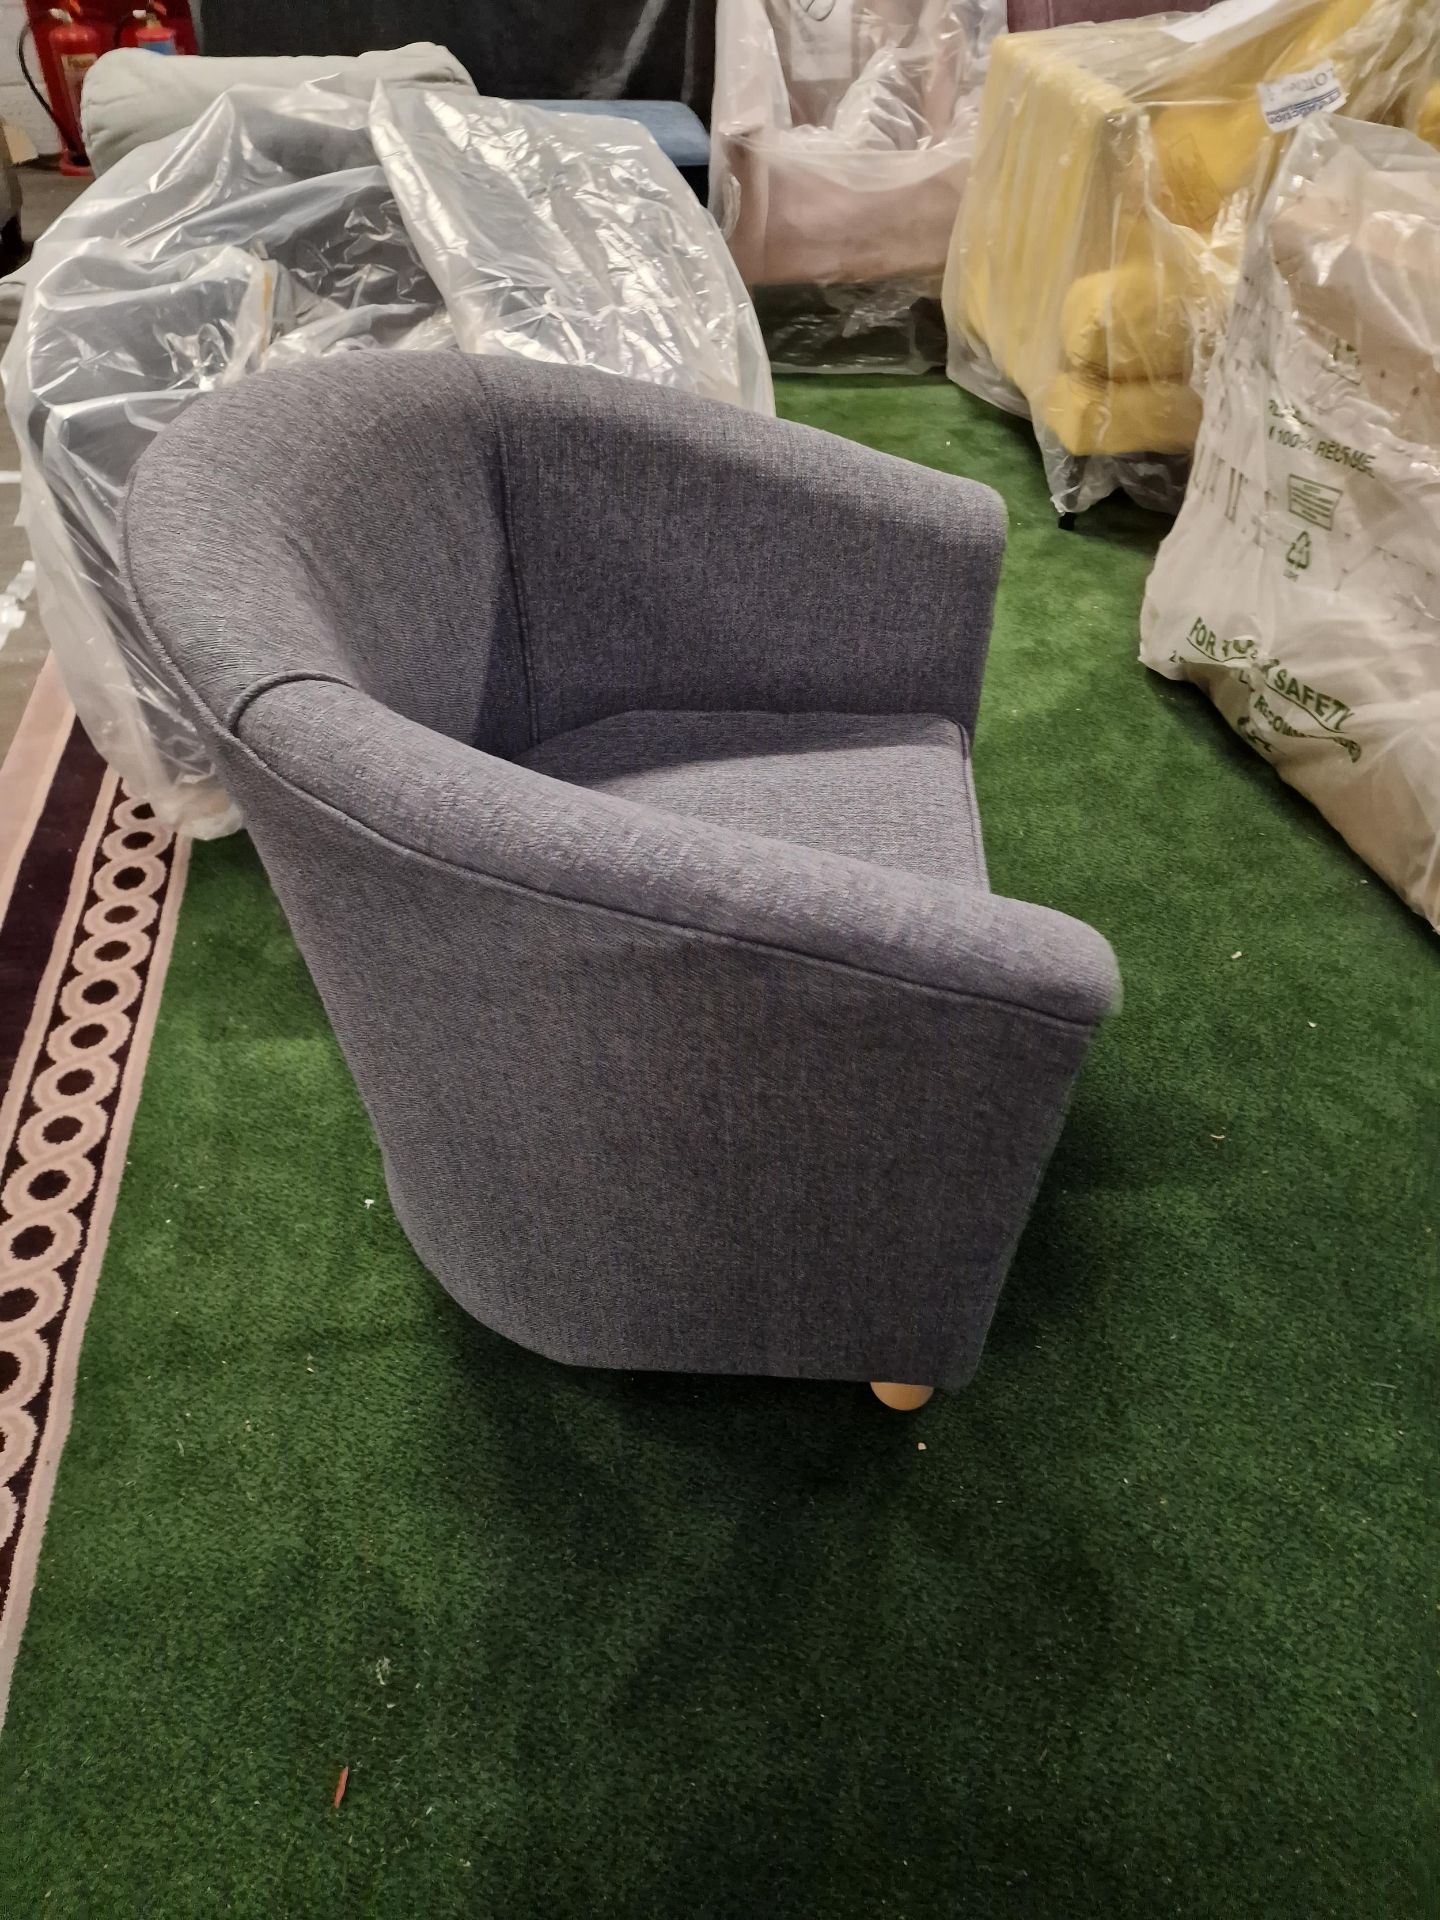 Dreamworks Hilton Tub Chair In Forza Slate The Classic Design Emphasises A Streamlined Silhouette, - Bild 2 aus 3